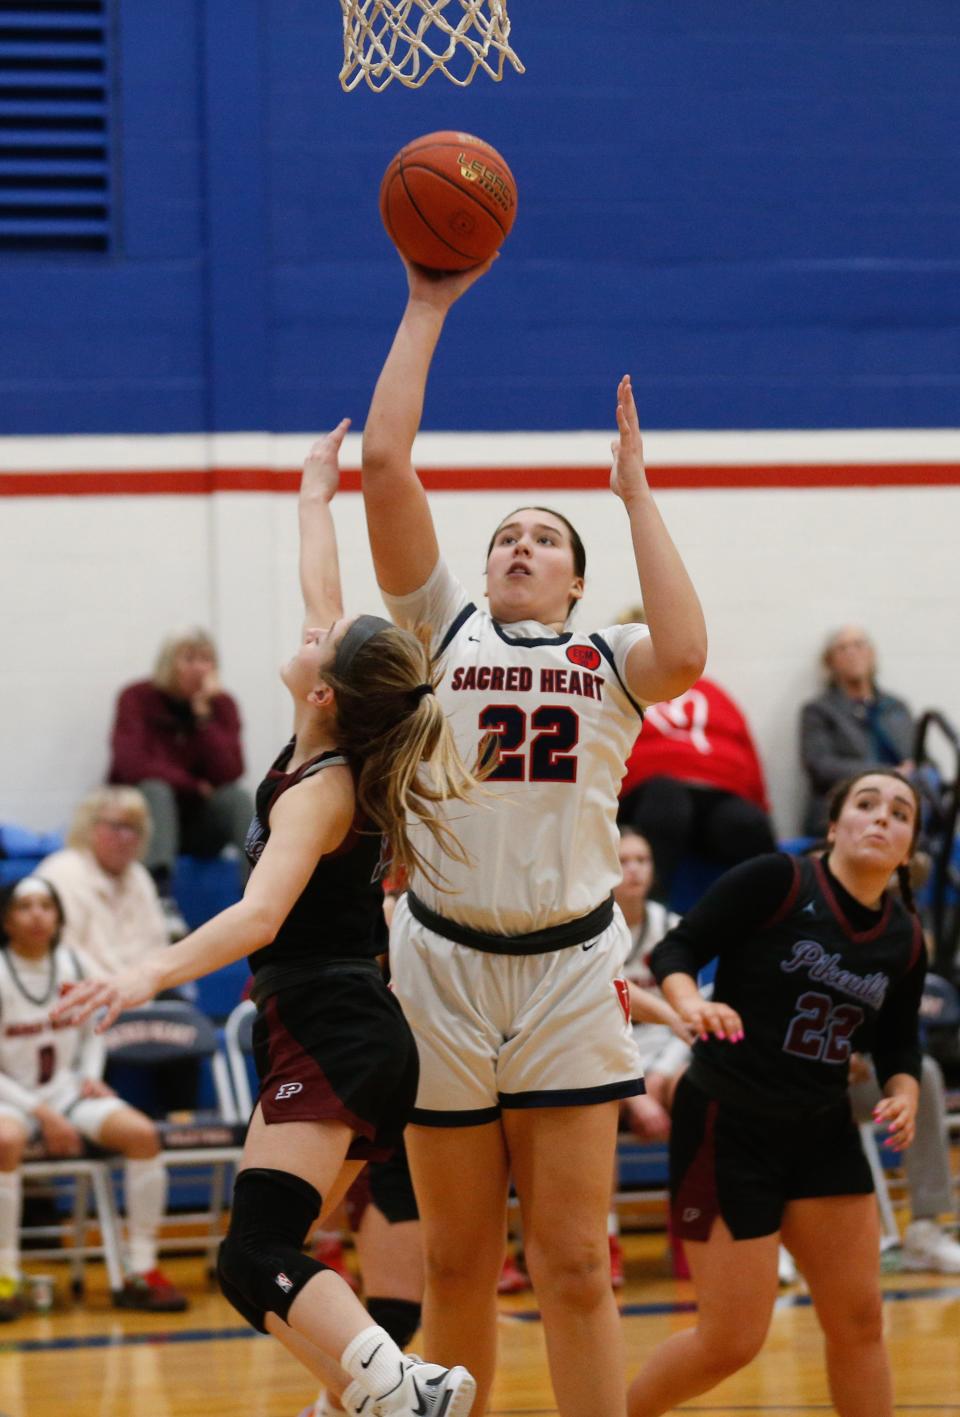 Sacred Heart’s Angelina Pelayo makes the basket against Pikeville’s Kristen Whited Saturday afternoon in Louisville.